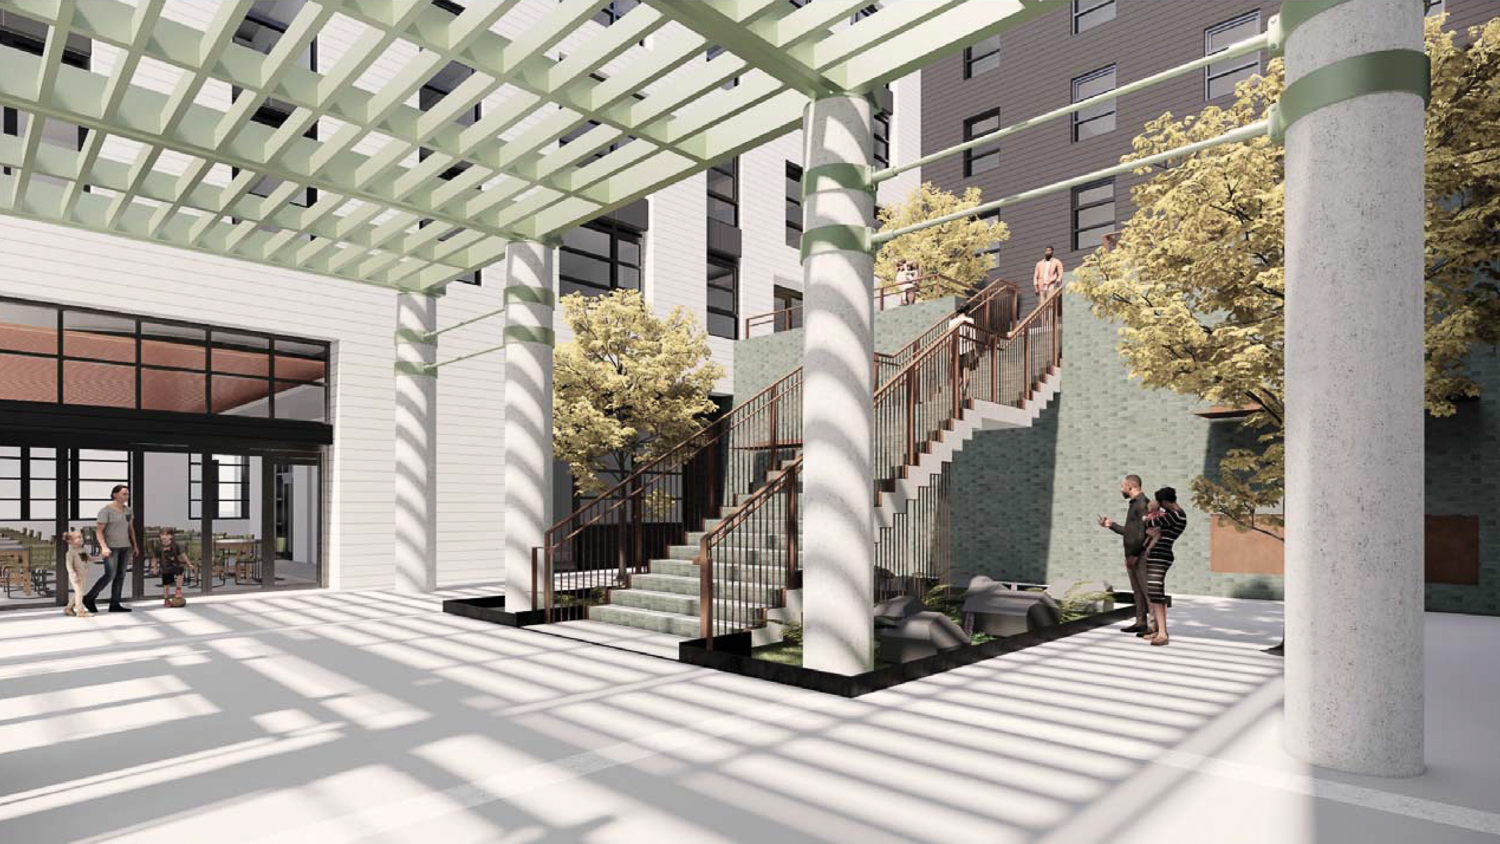 Hunters Point Shipyard Block 52 entry courtyard, rendering by Mithun